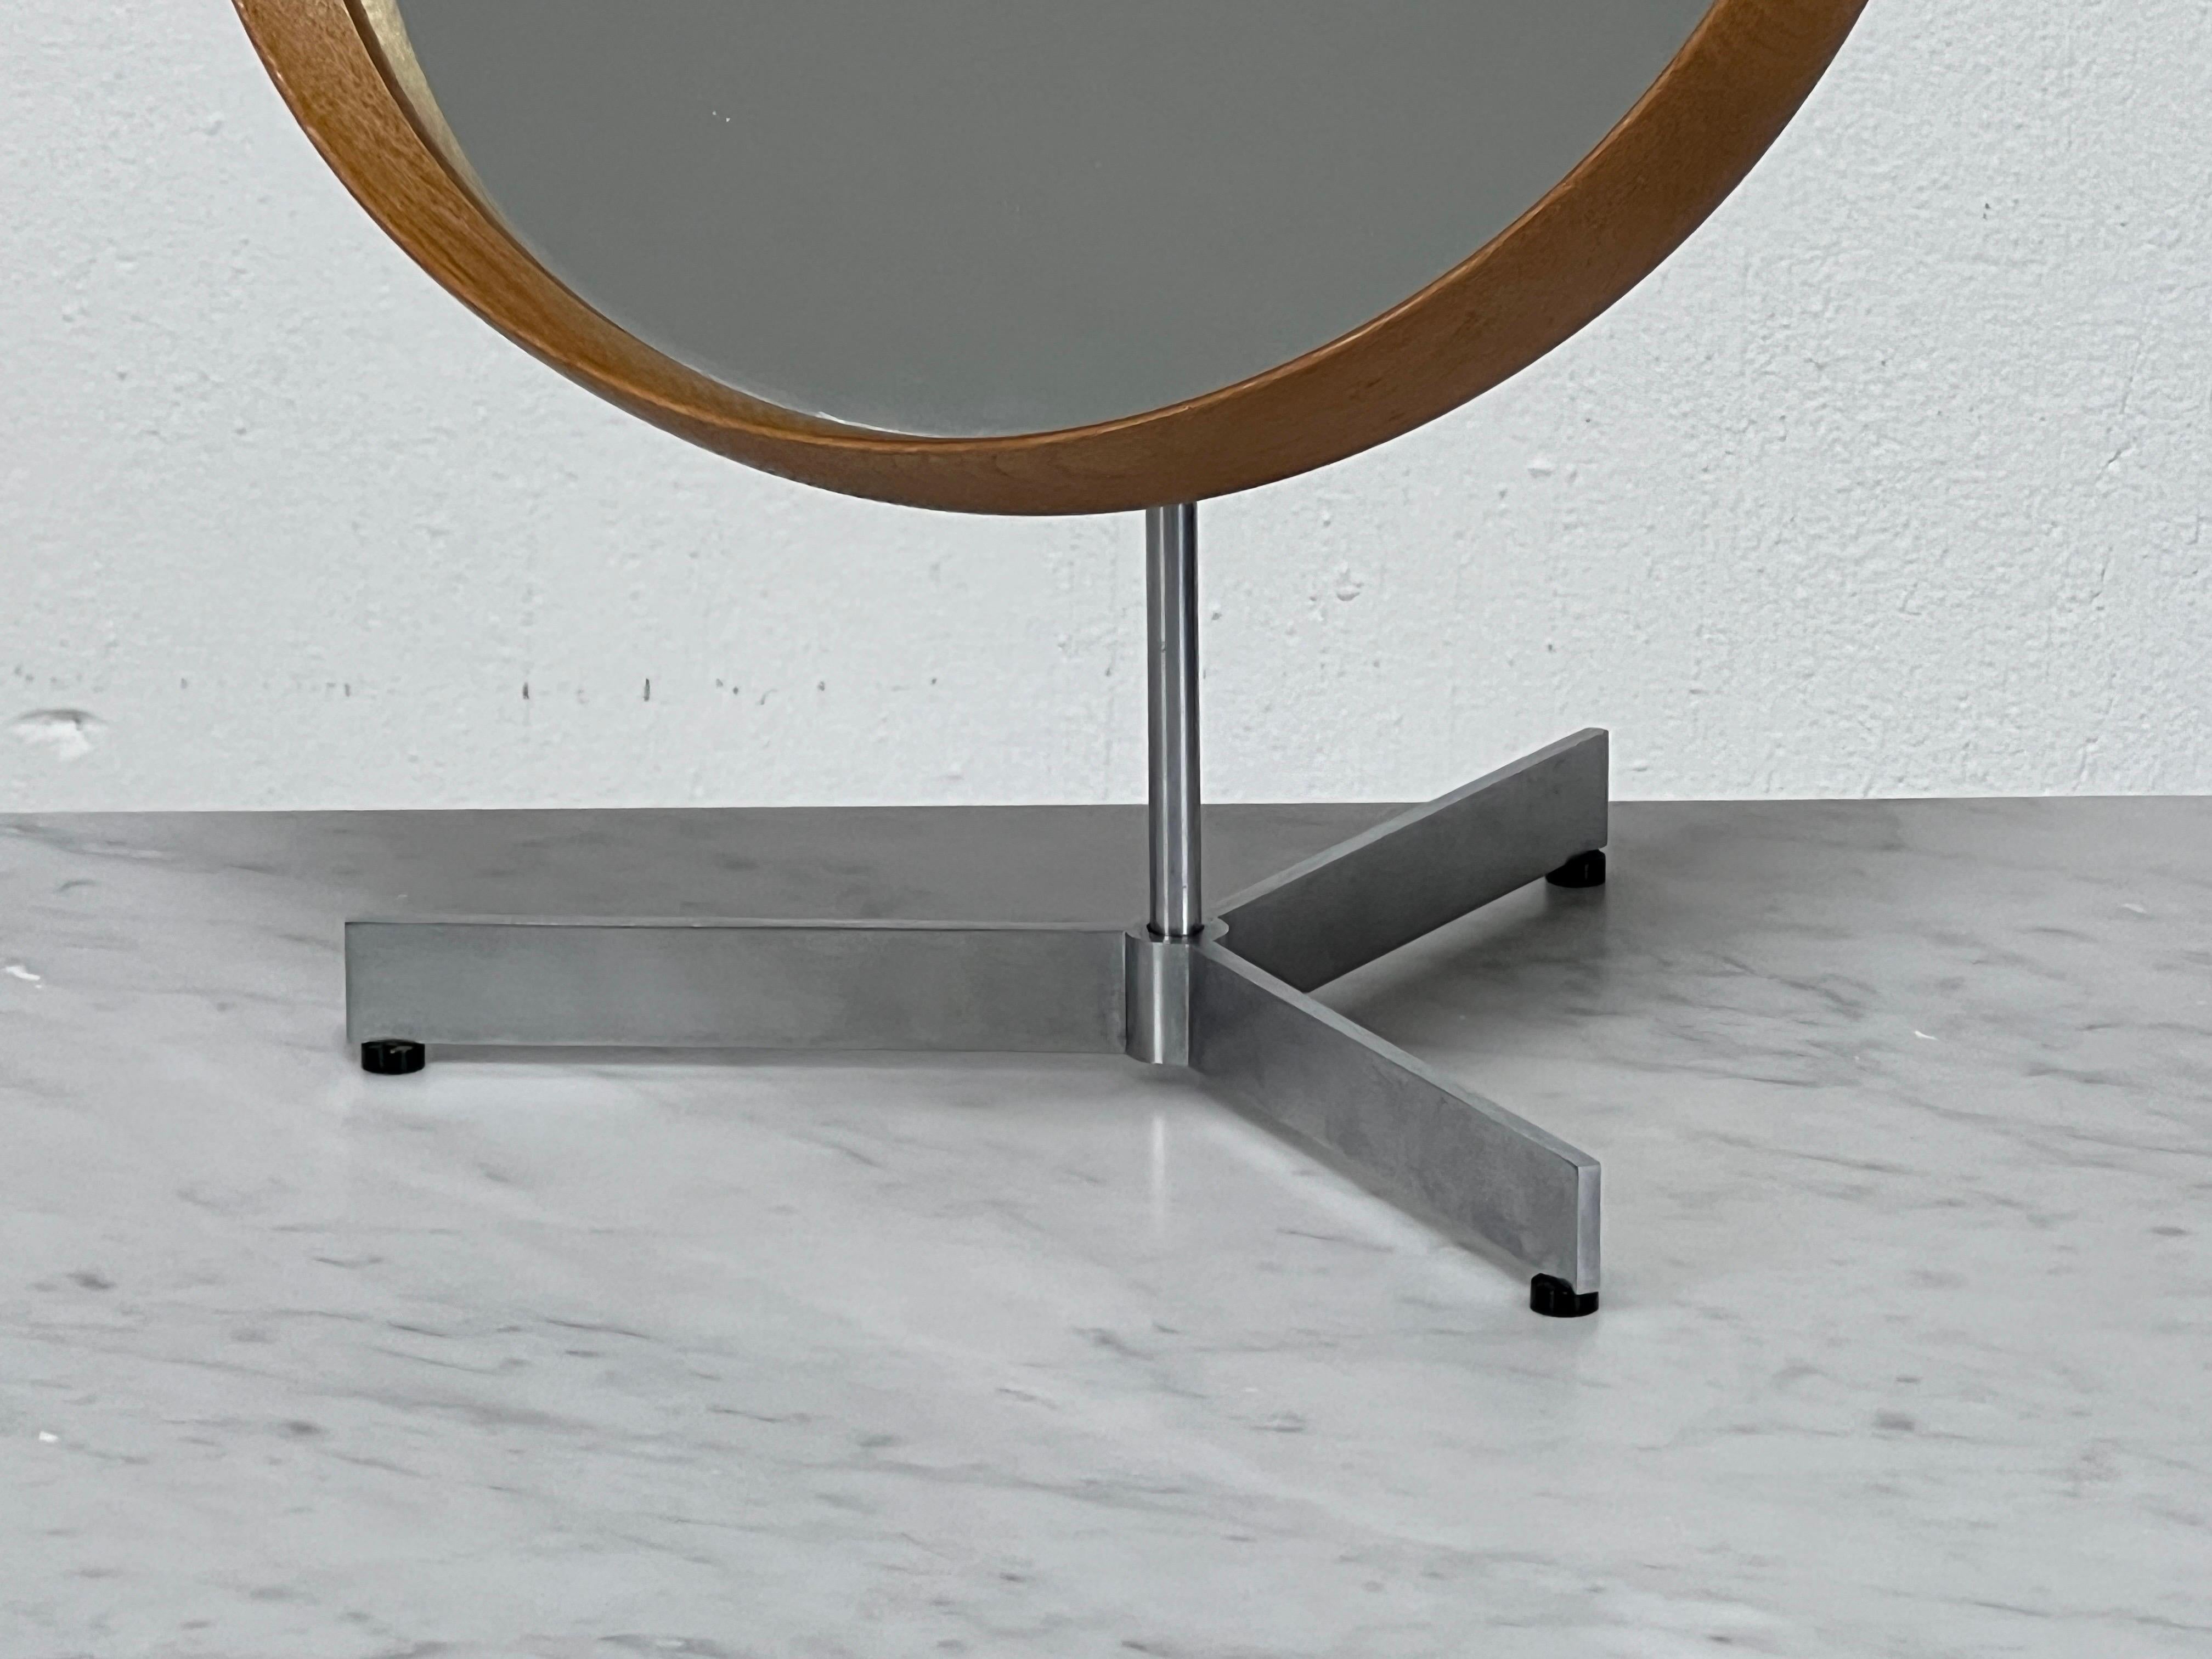 Oak Table Mirror by Uno & Östen Kristiansson for Luxus of Sweden, 1960s In Good Condition For Sale In Dallas, TX